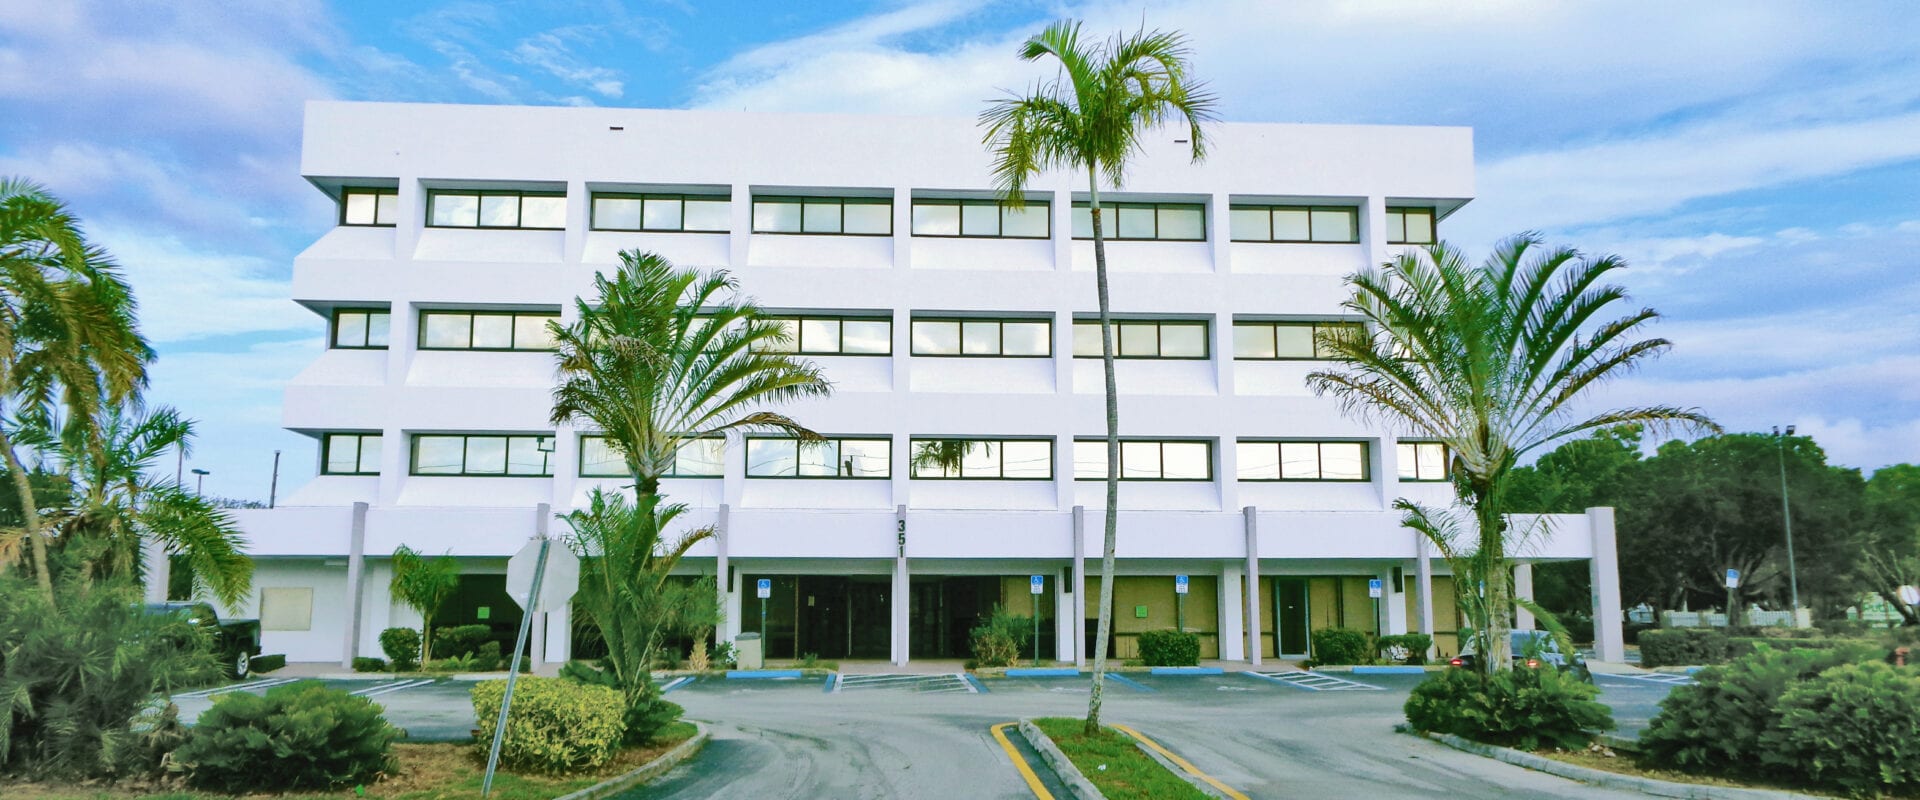 For Lease Office Space Pompano Beach 250 SF